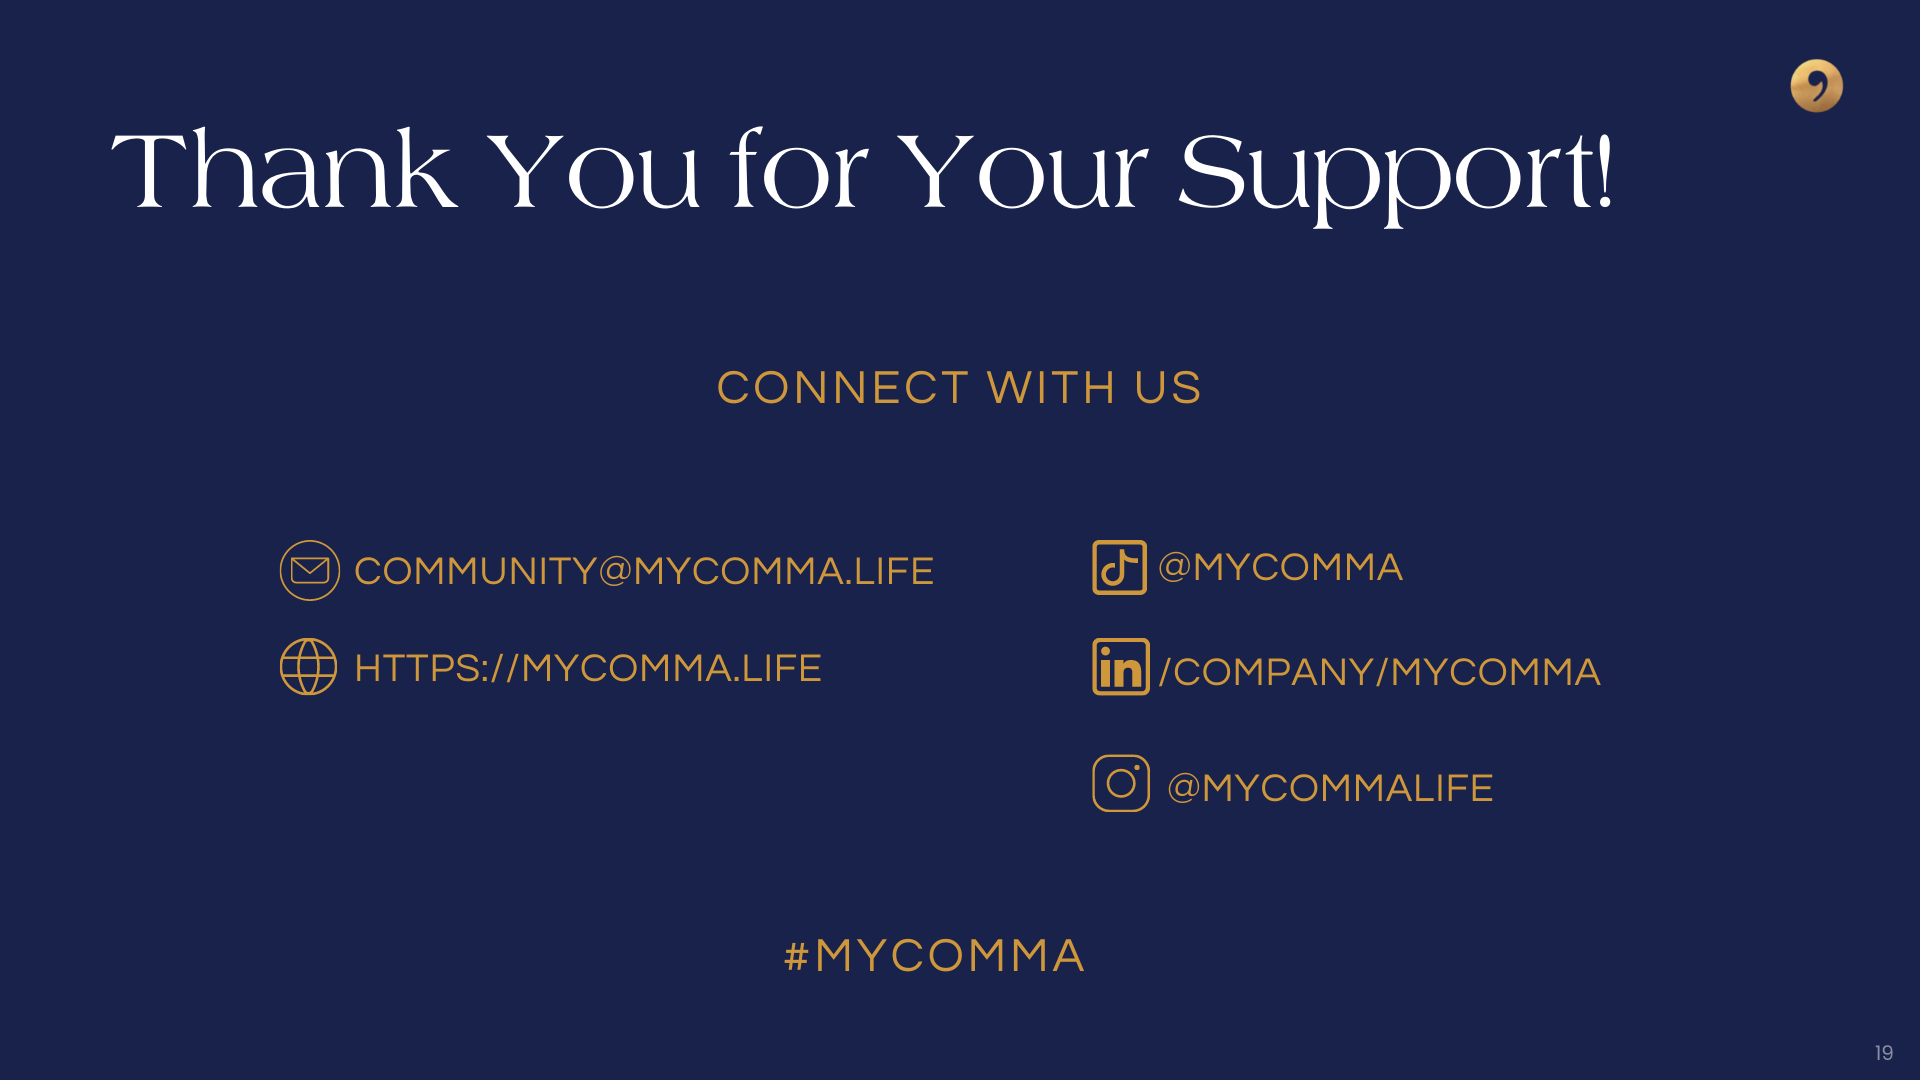 Support the My Comma crowdfunding campaign by contributing or following us on social media.